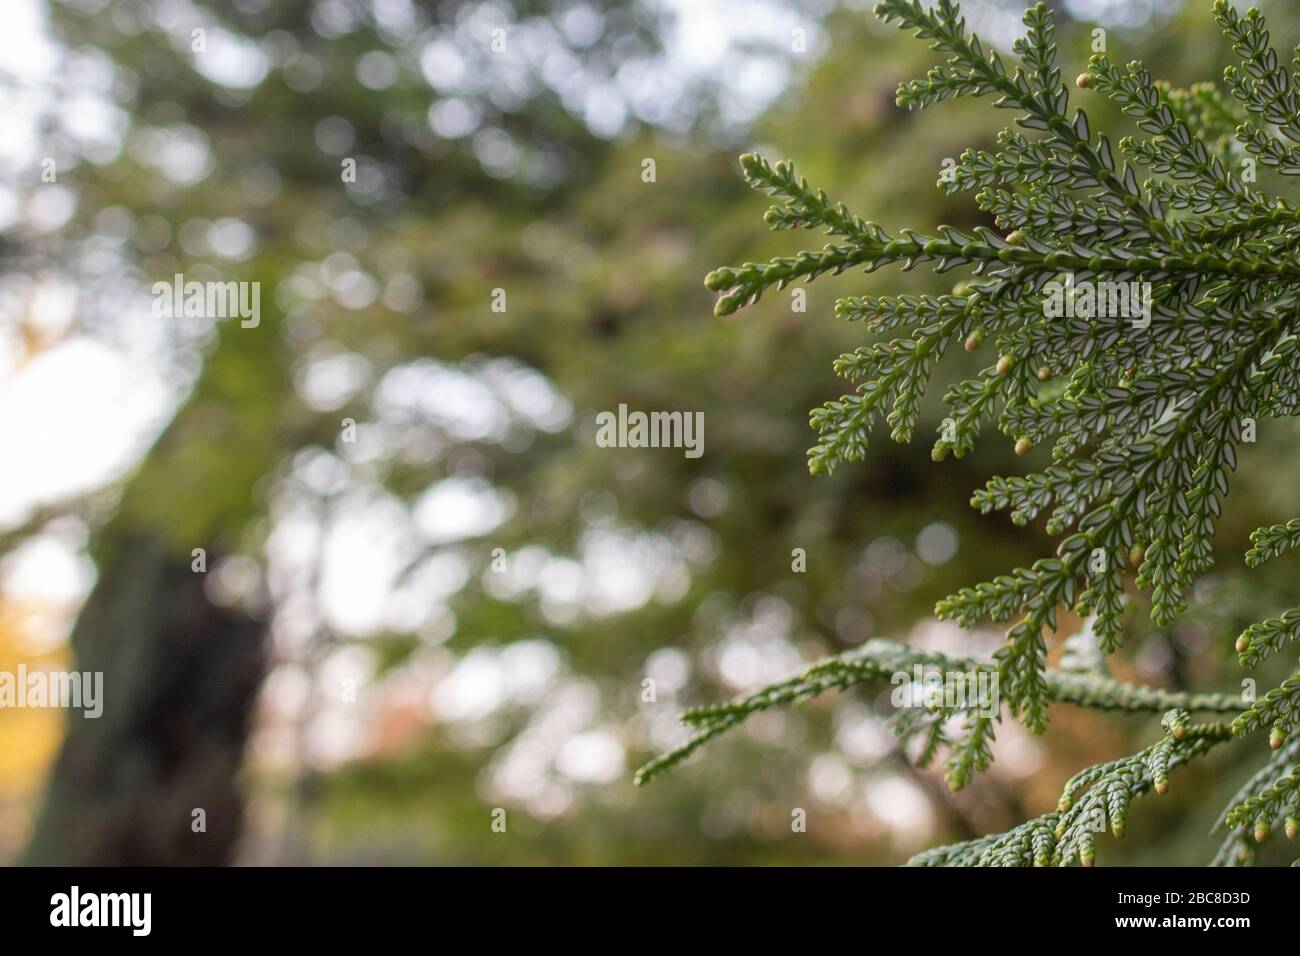 The leaves of the tree with the Latin name thujopsis closet. Close-up. Stock Photo